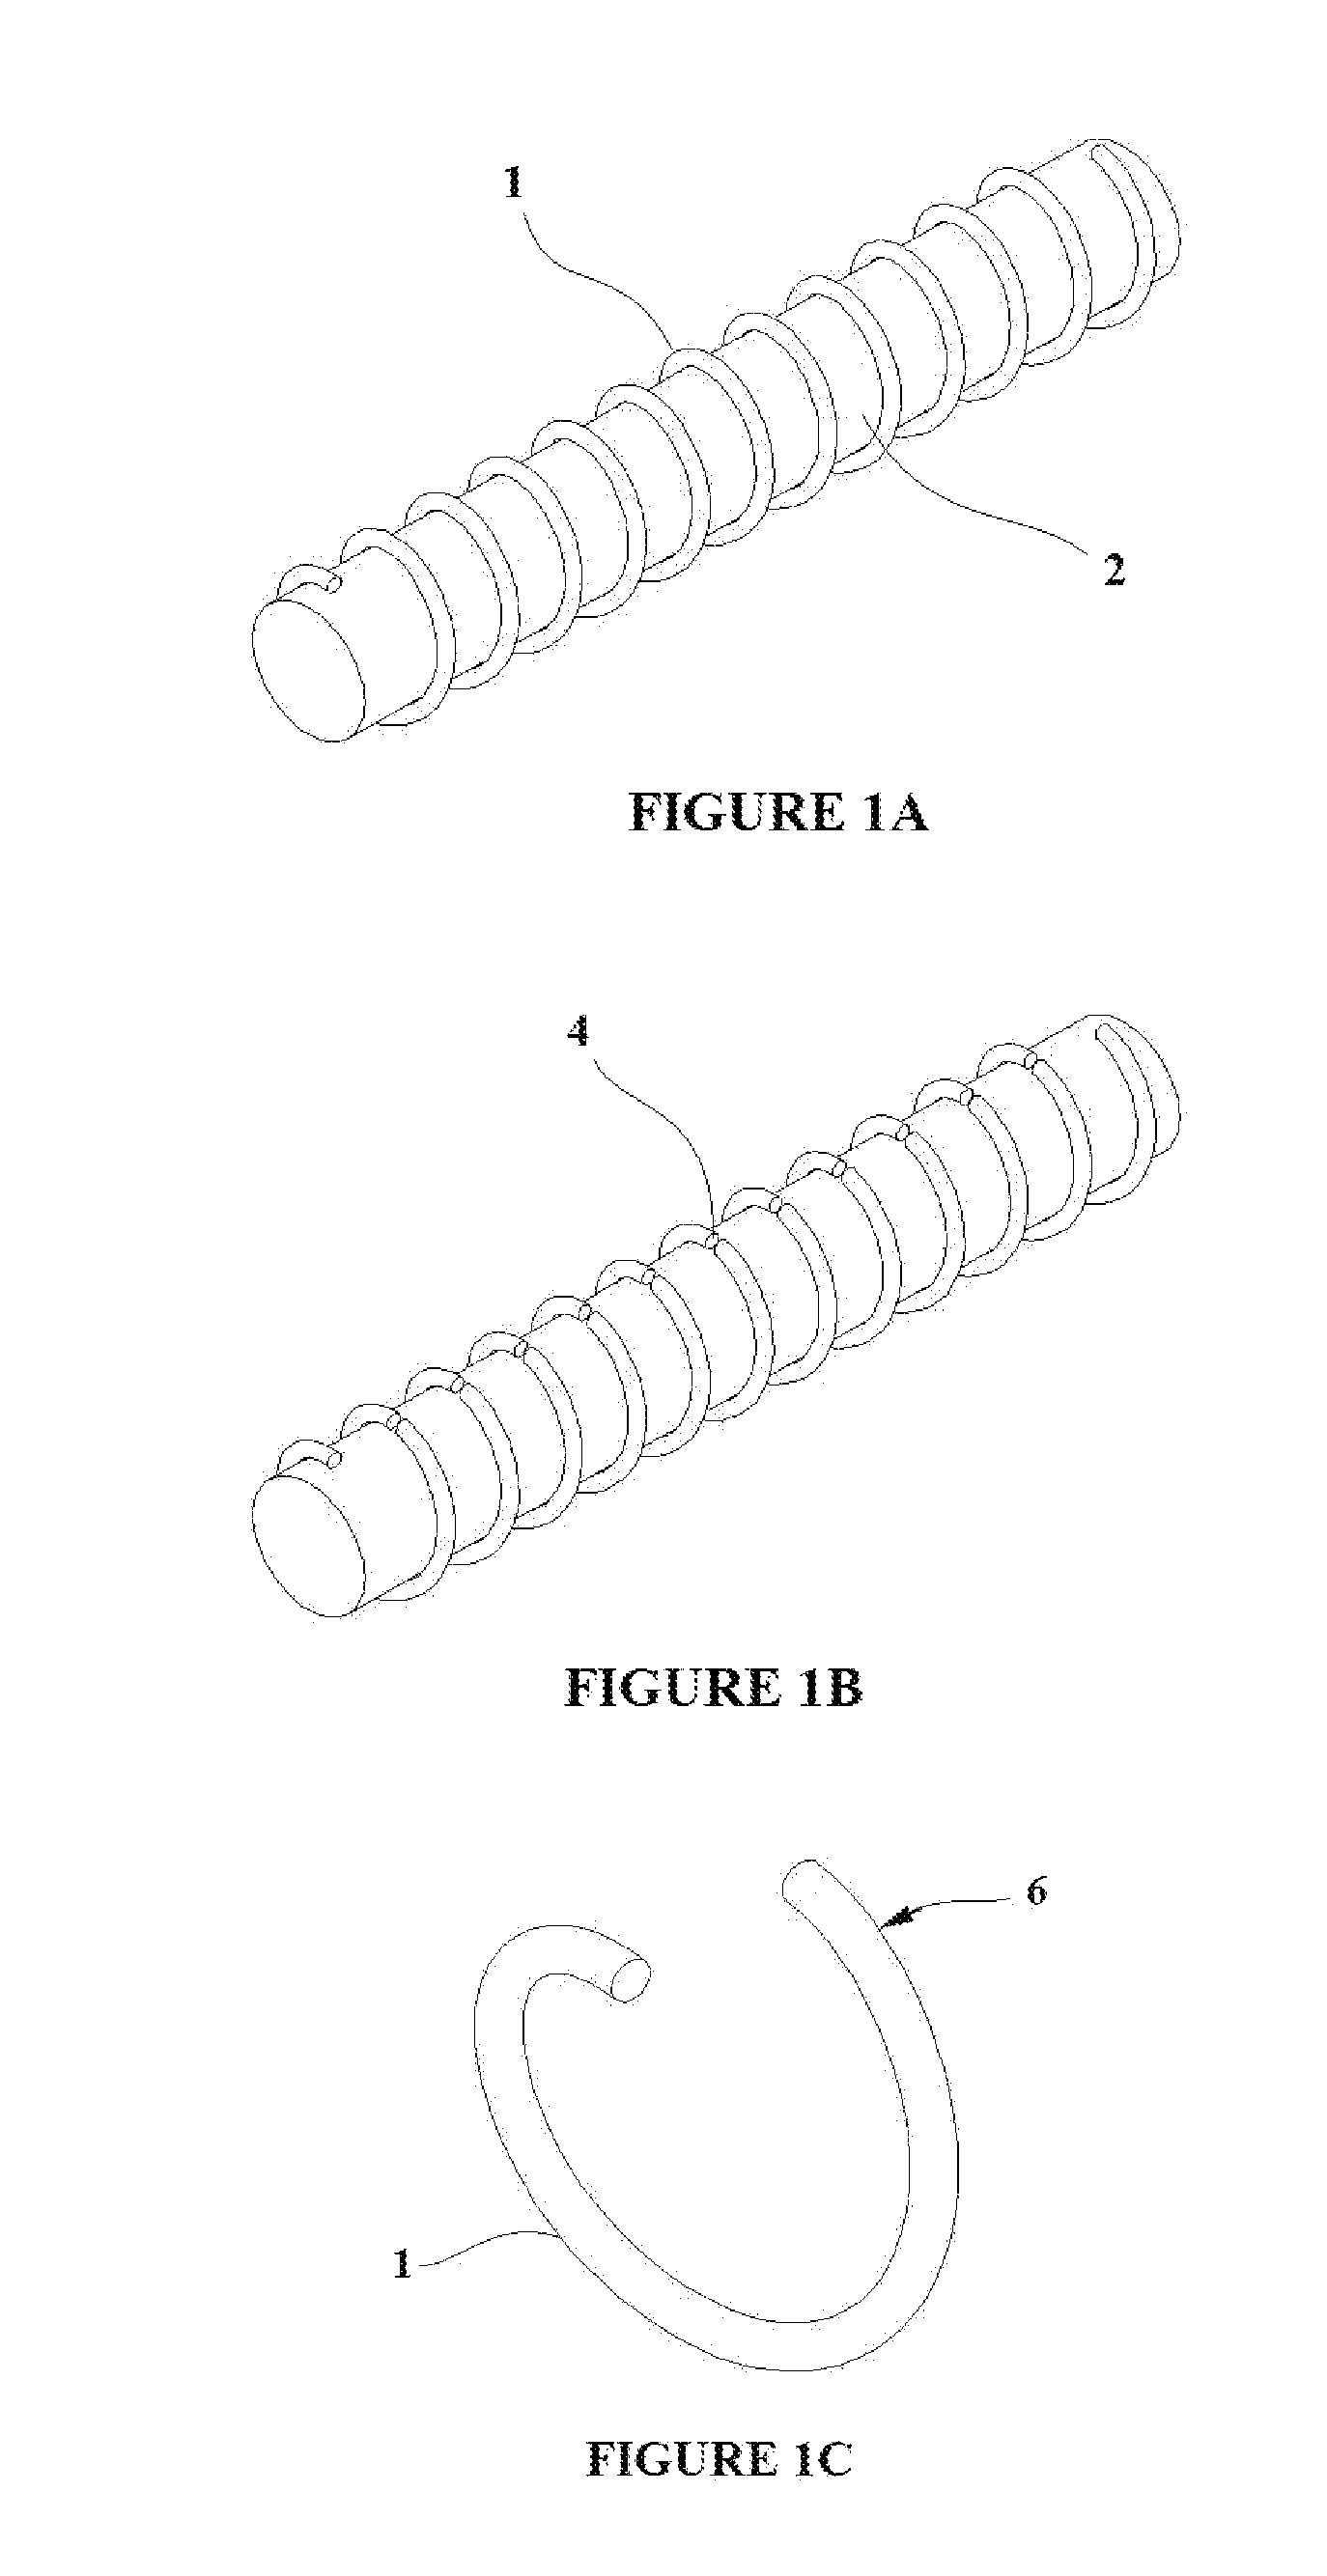 Apparatus and method for tissue adhesion